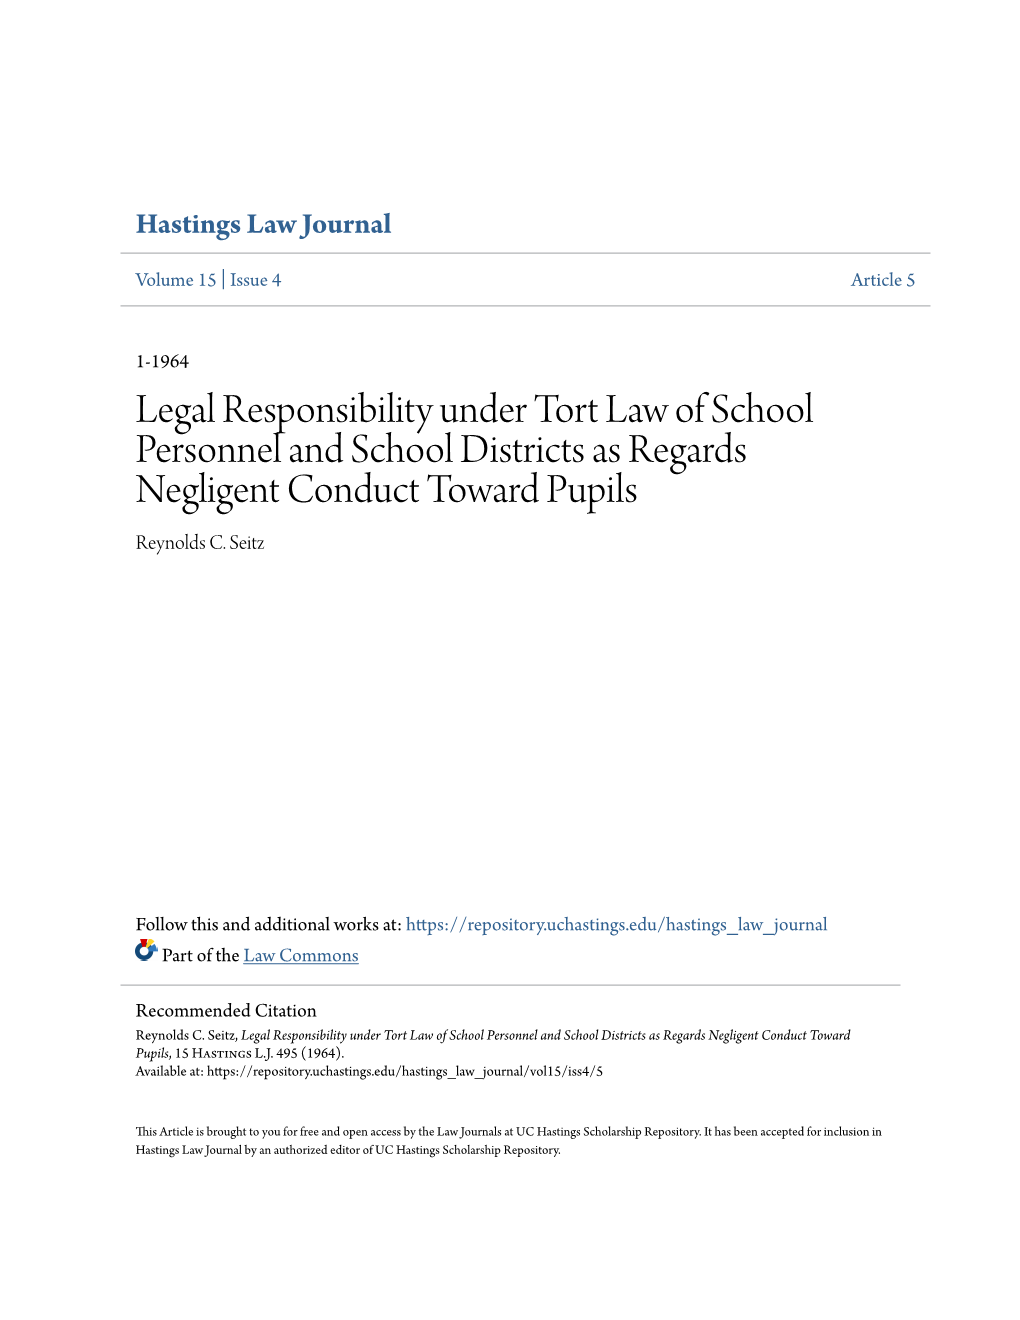 Legal Responsibility Under Tort Law of School Personnel and School Districts As Regards Negligent Conduct Toward Pupils Reynolds C